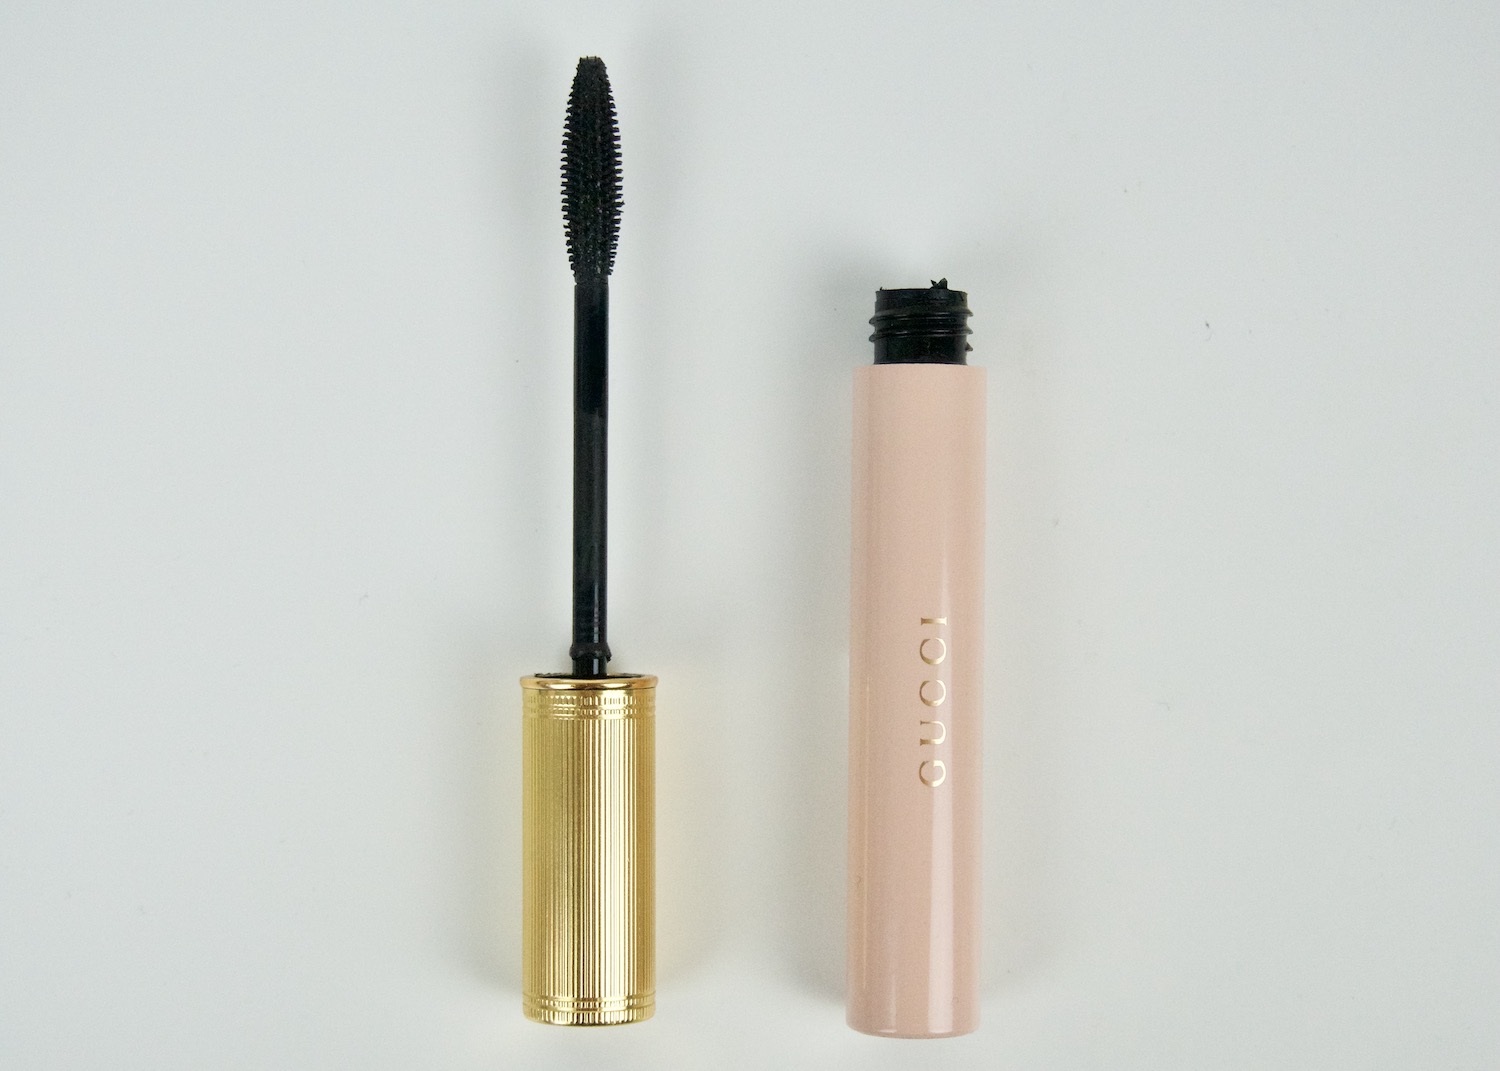 Gucci Beauty Mascara L'Obscur verpakking open